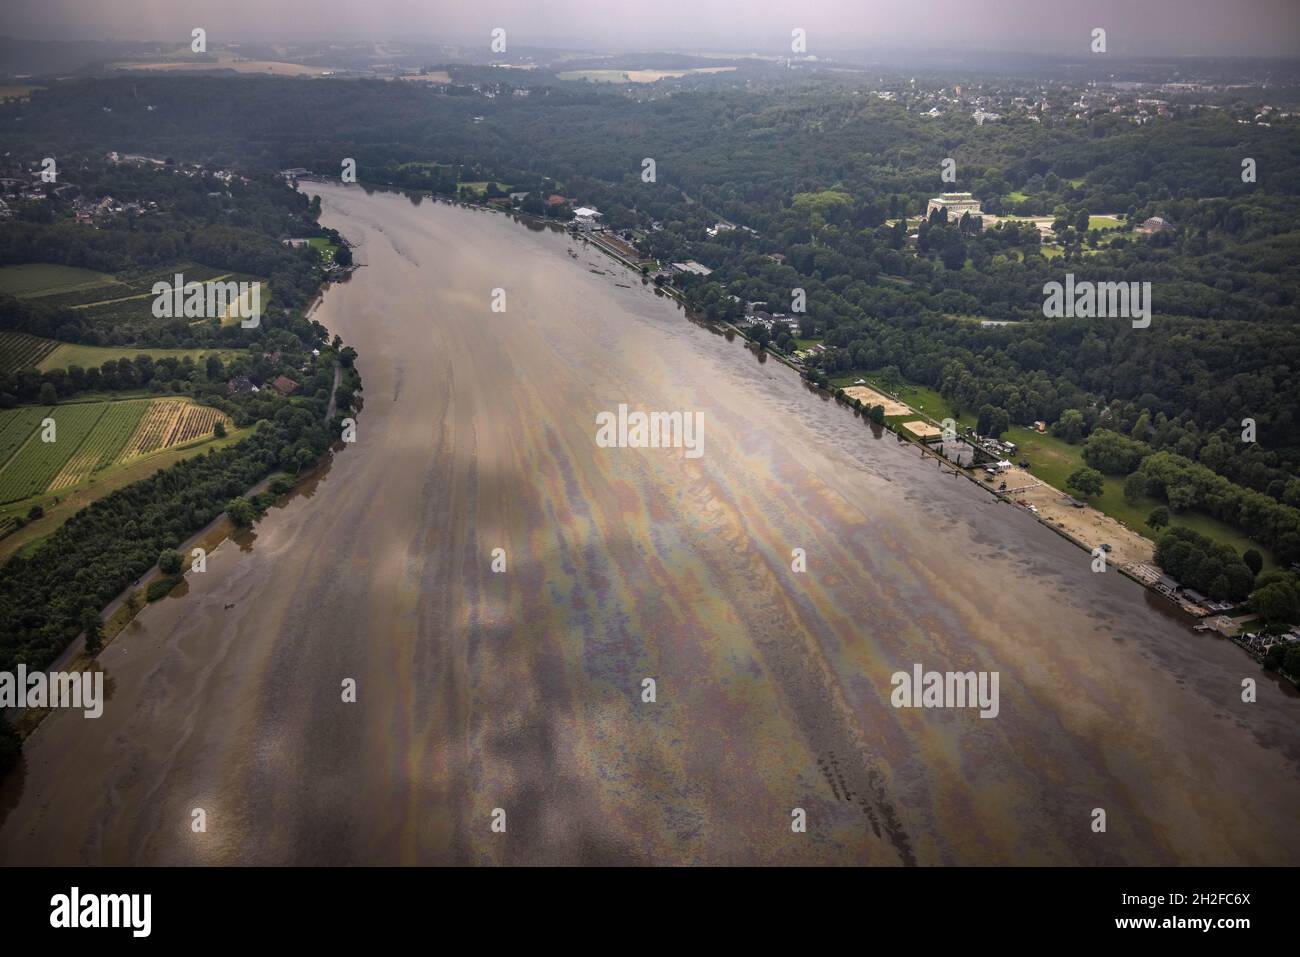 Aerial photograph, Ruhr flood, flooding, Baldeneysee with oil discolouration on the water surface, Fischlaken, Essen, Ruhr area, North Rhine-Westphali Stock Photo